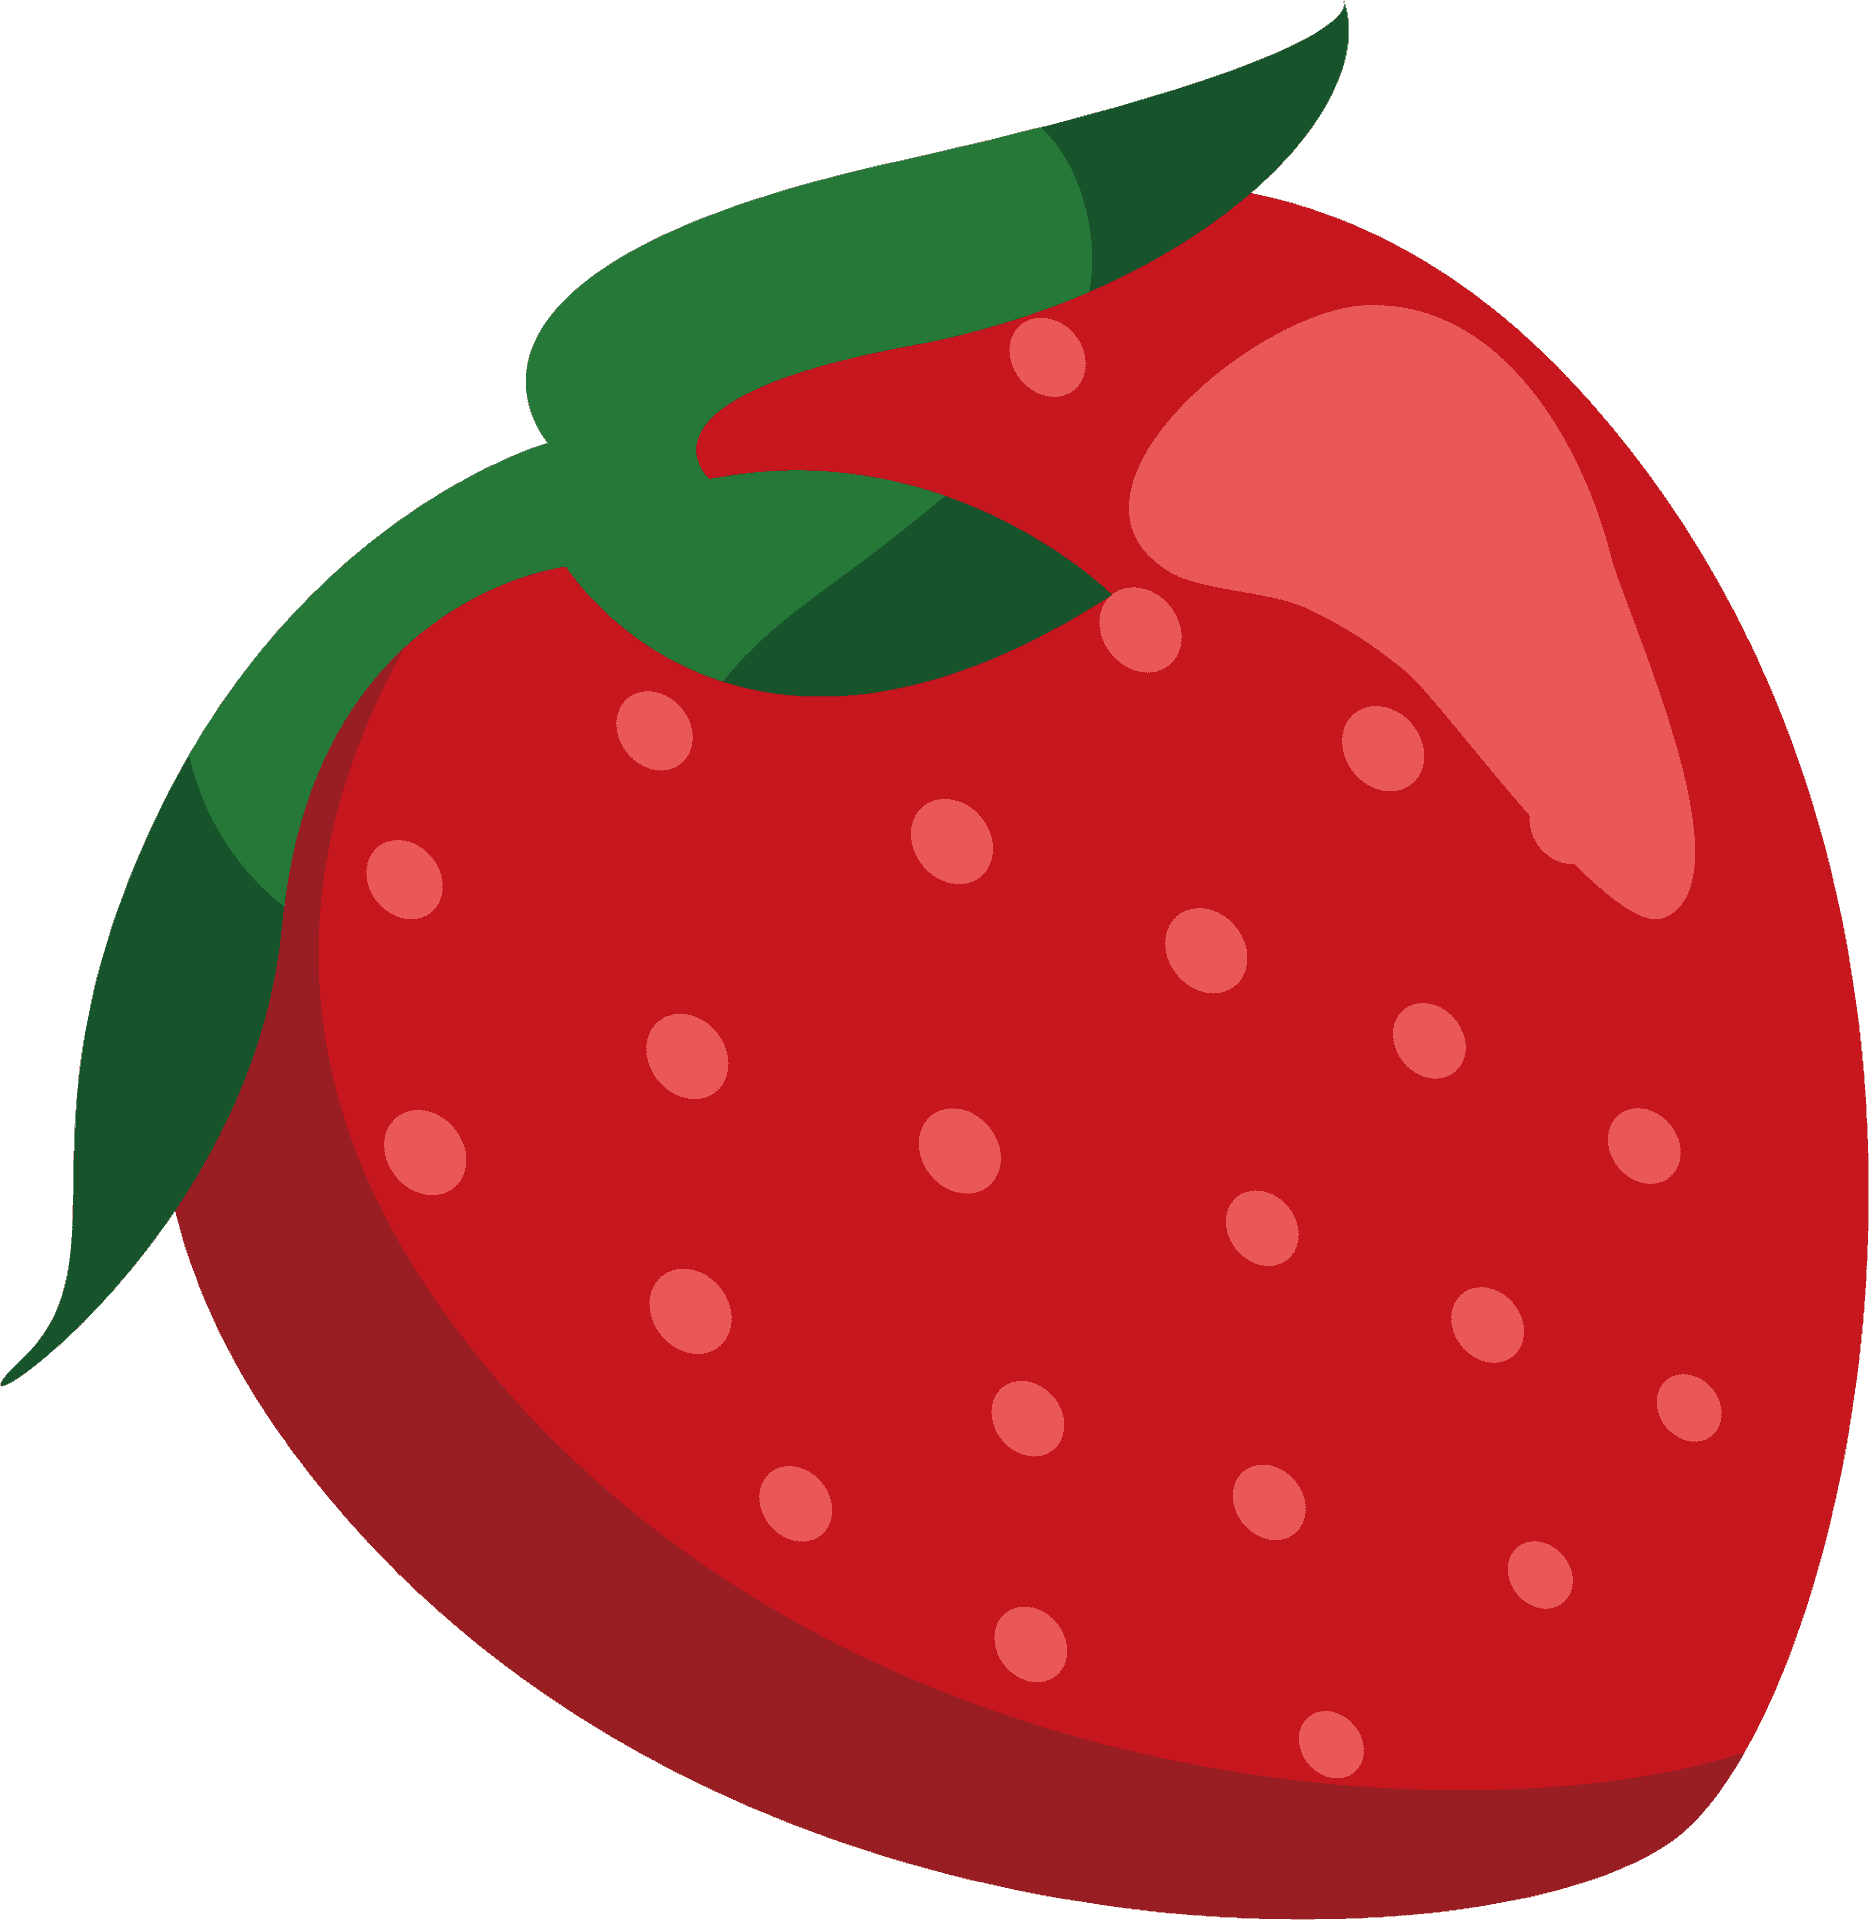 Red Strawberry Cartoon Illustration PNG image